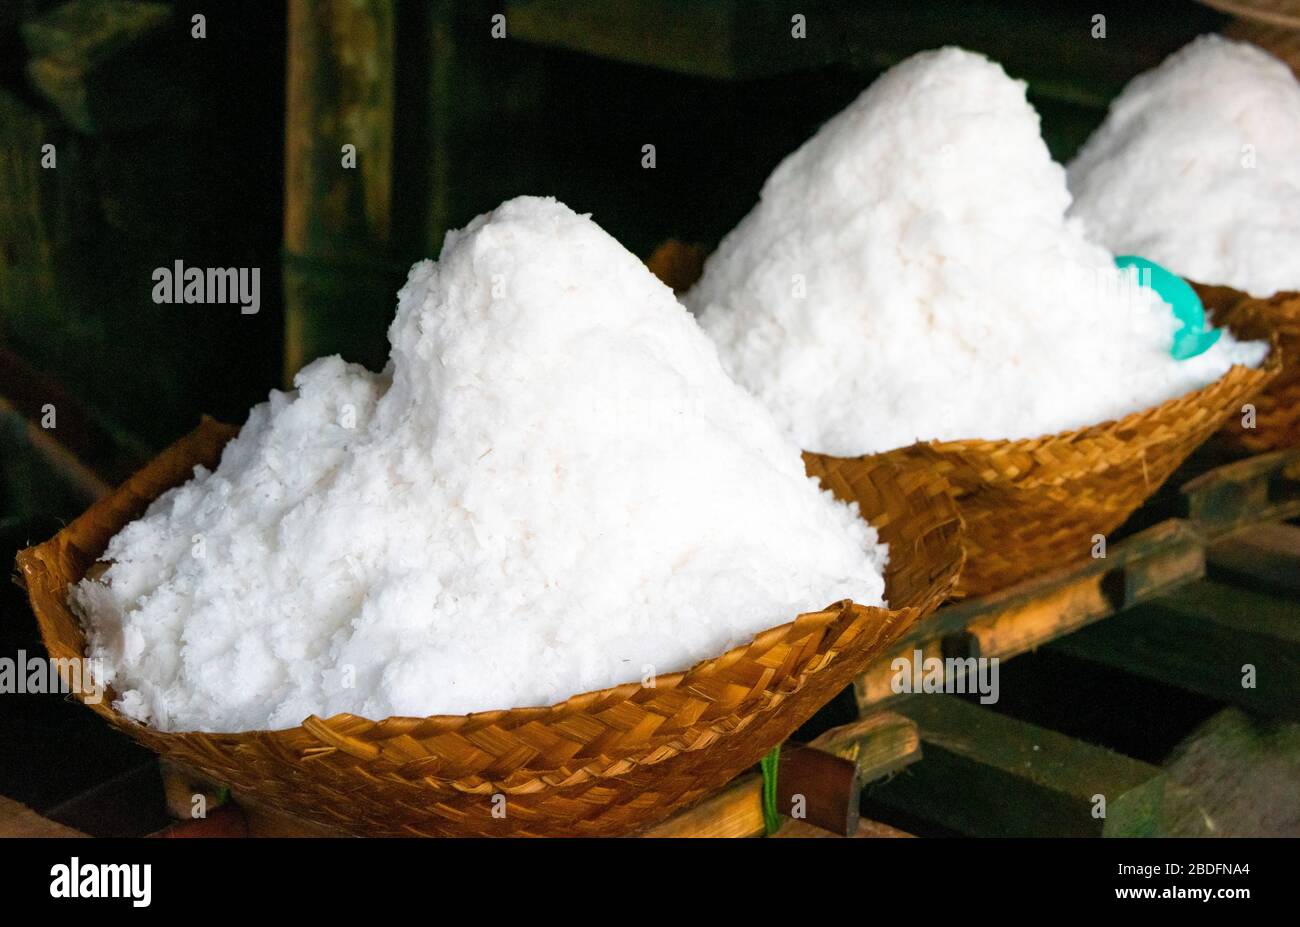 Horizontal close up of a traditional seasalt in Bali, Indonesia. Stock Photo